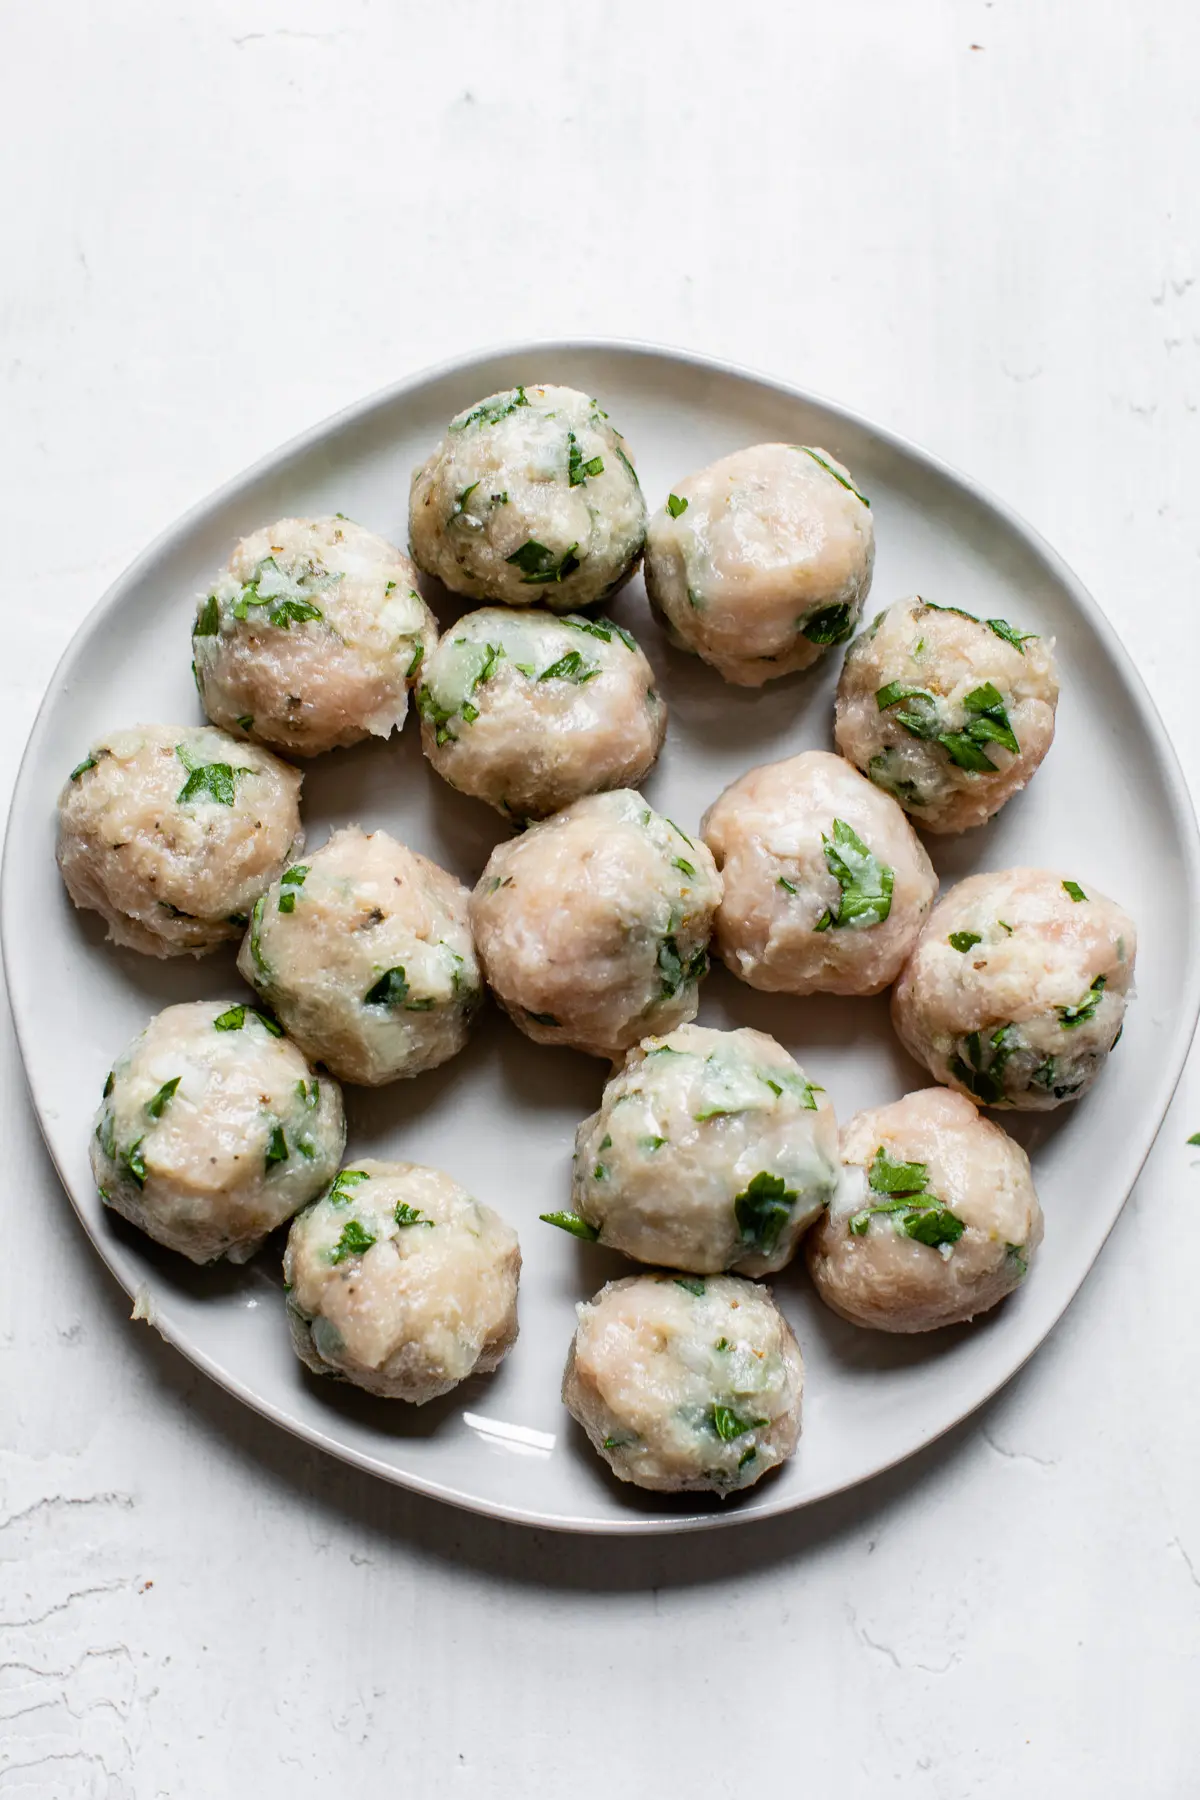 uncooked meatballs on a plate